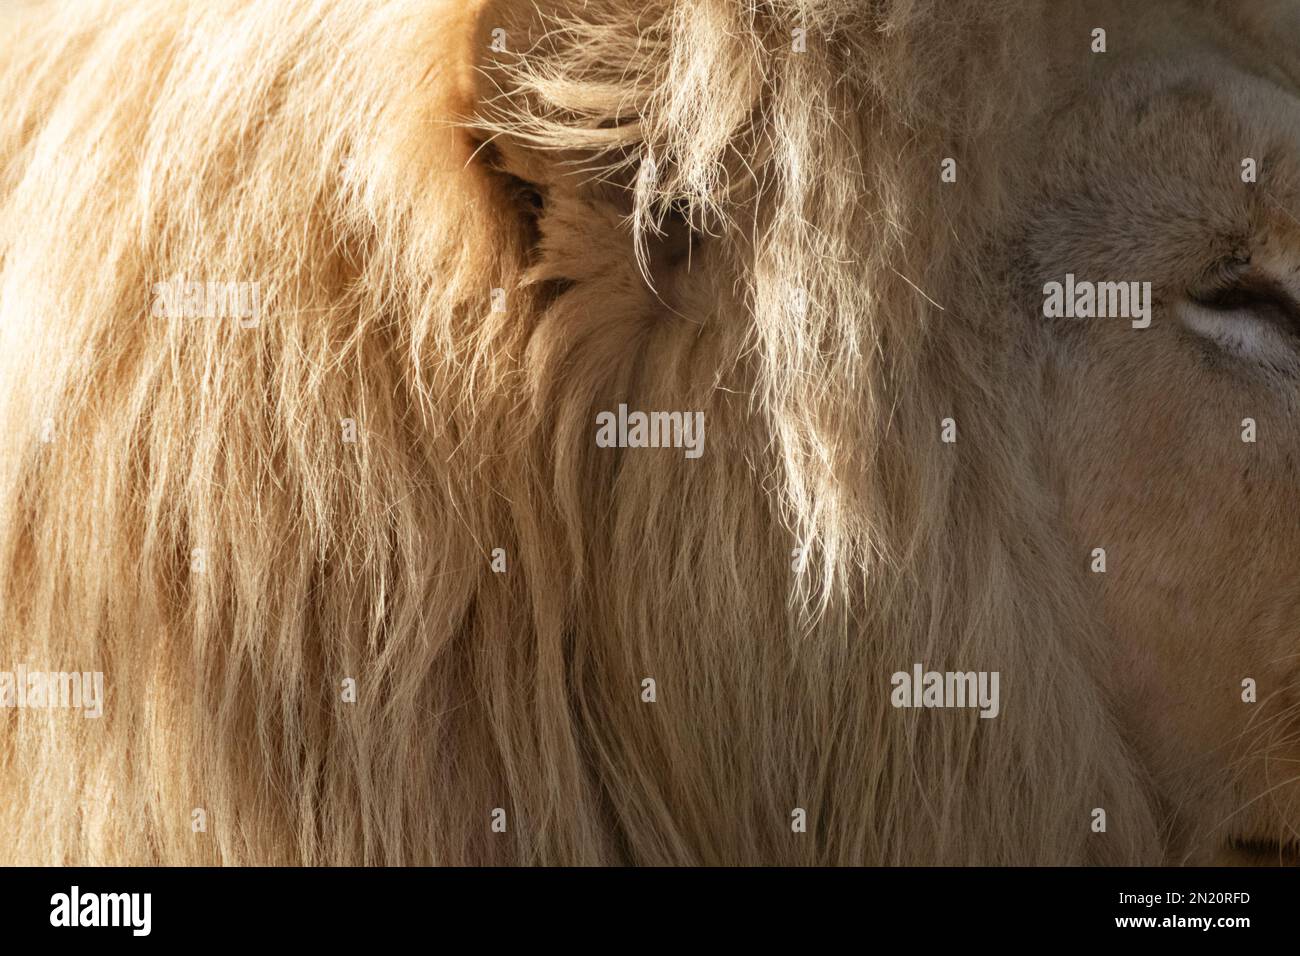 Lion ear with sunny fluffy mane fur close-up details. Big cat long fur on head Stock Photo